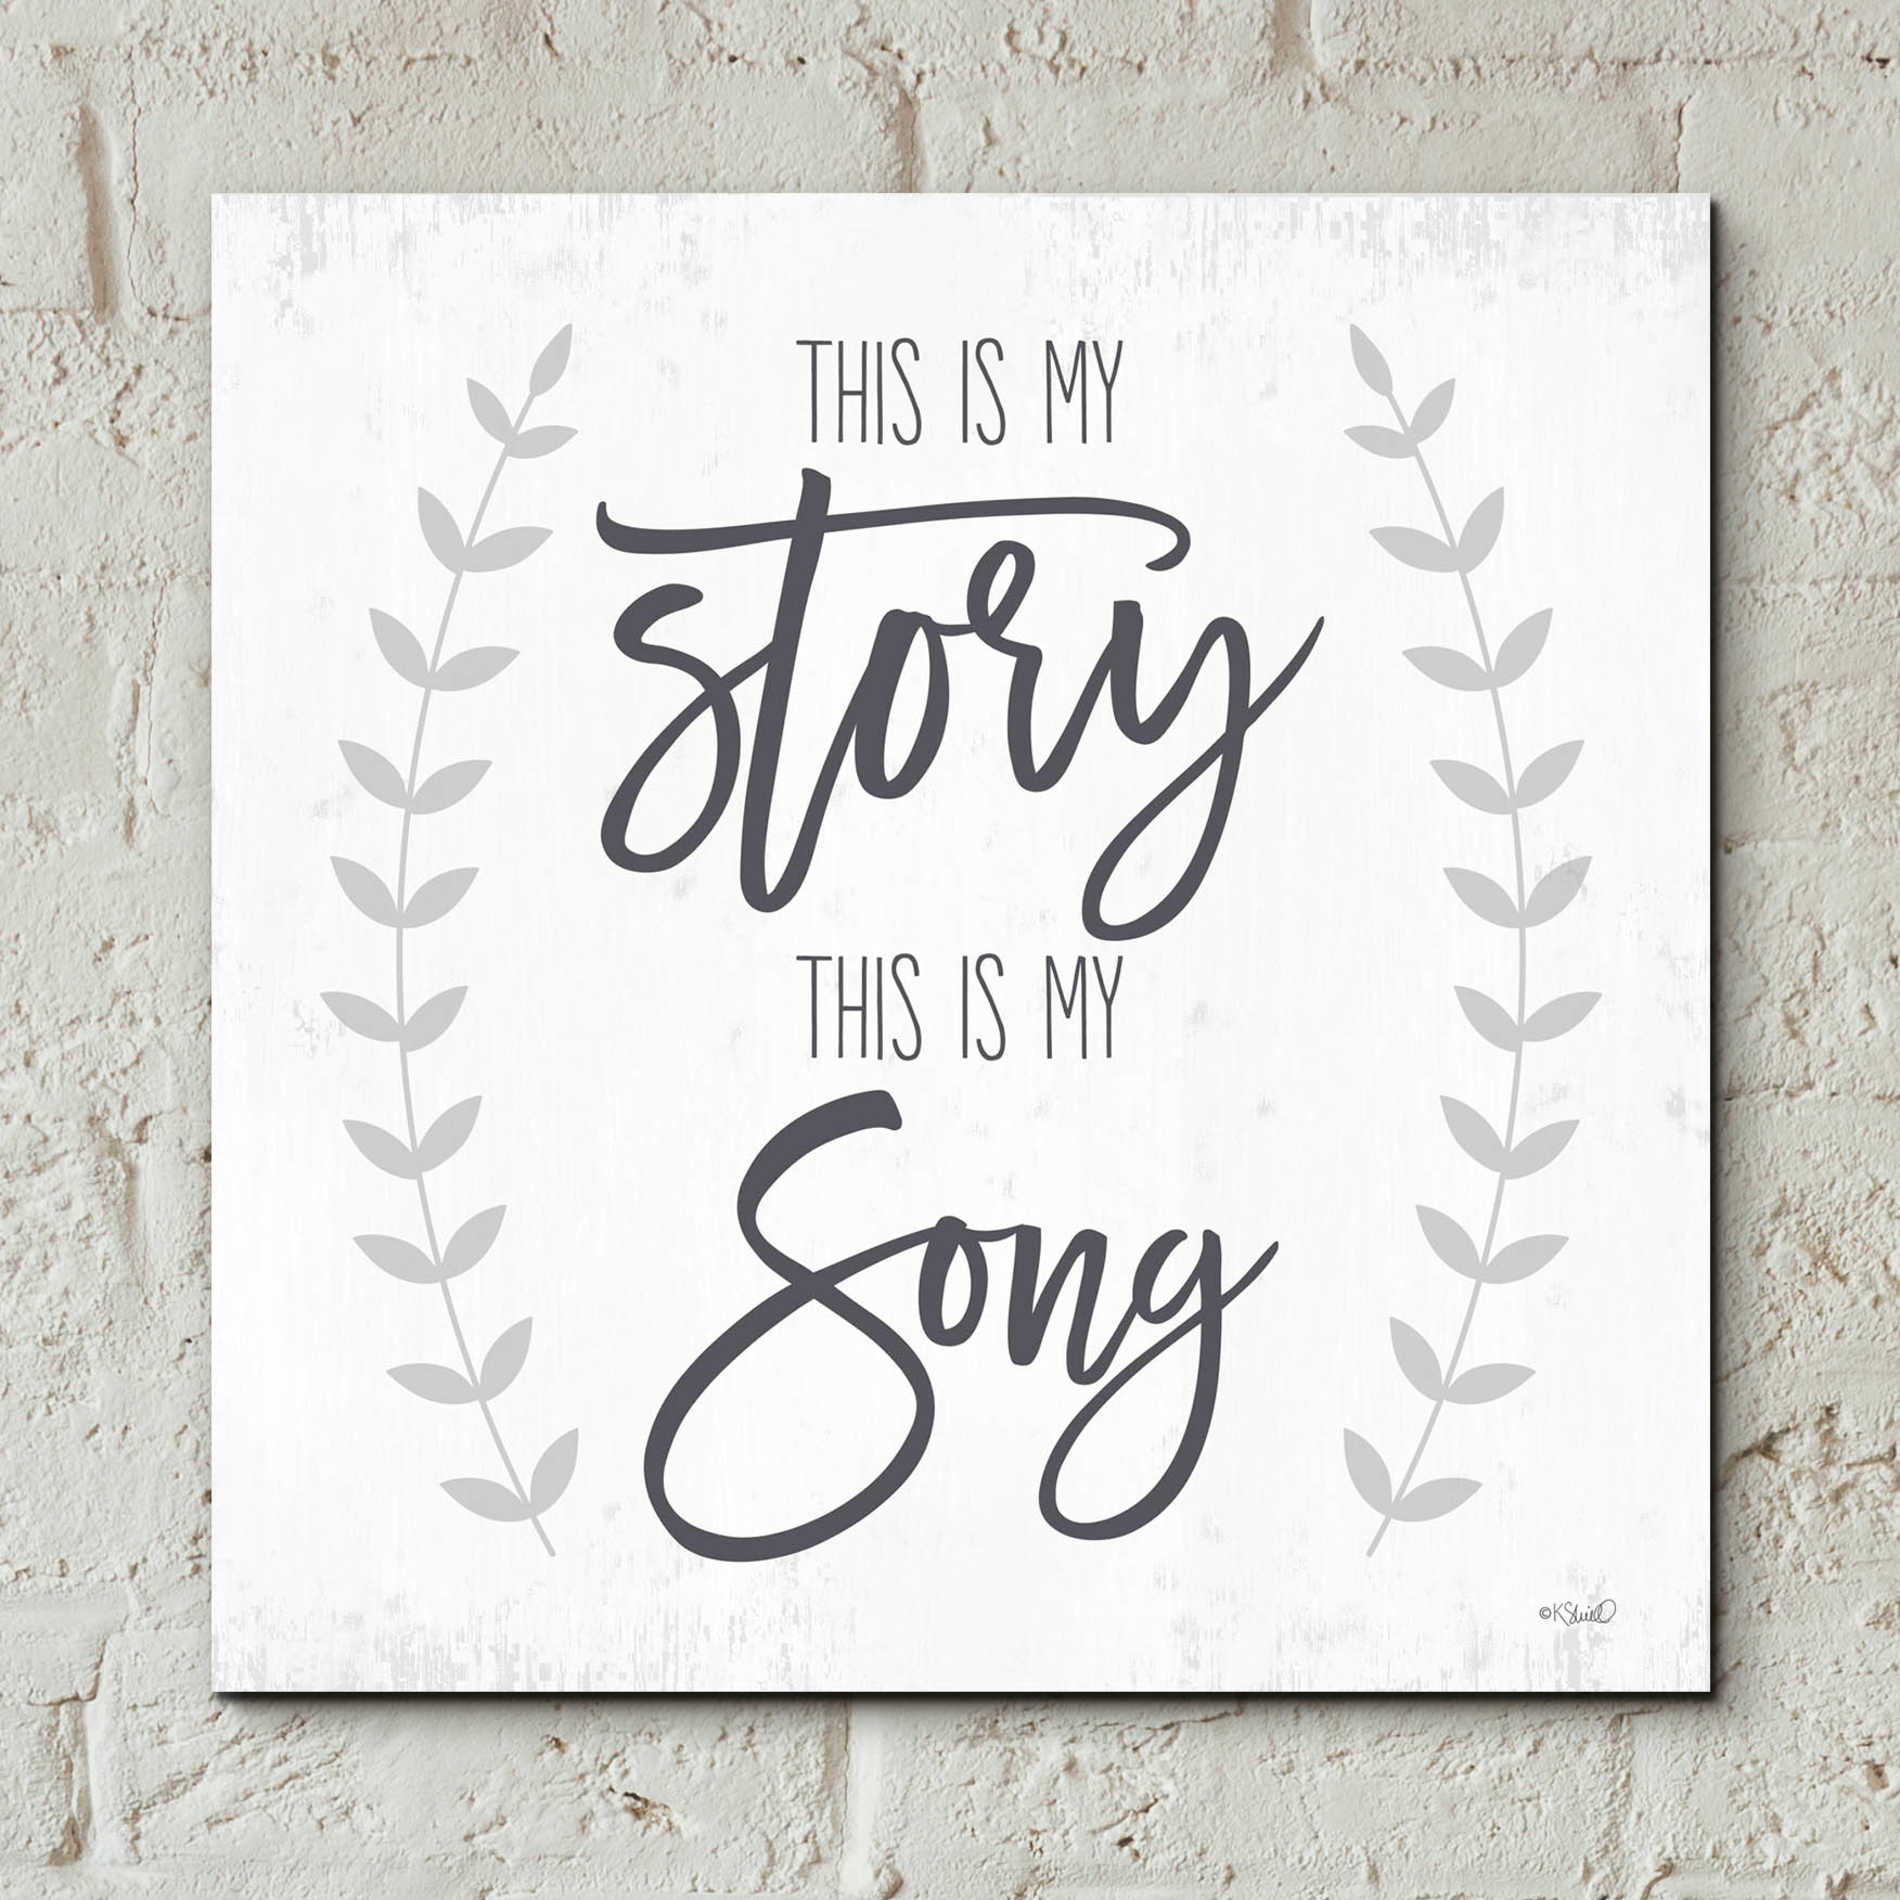 Epic Art 'This is My Story I' by Kate Sherrill, Acrylic Glass Wall Art,12x12